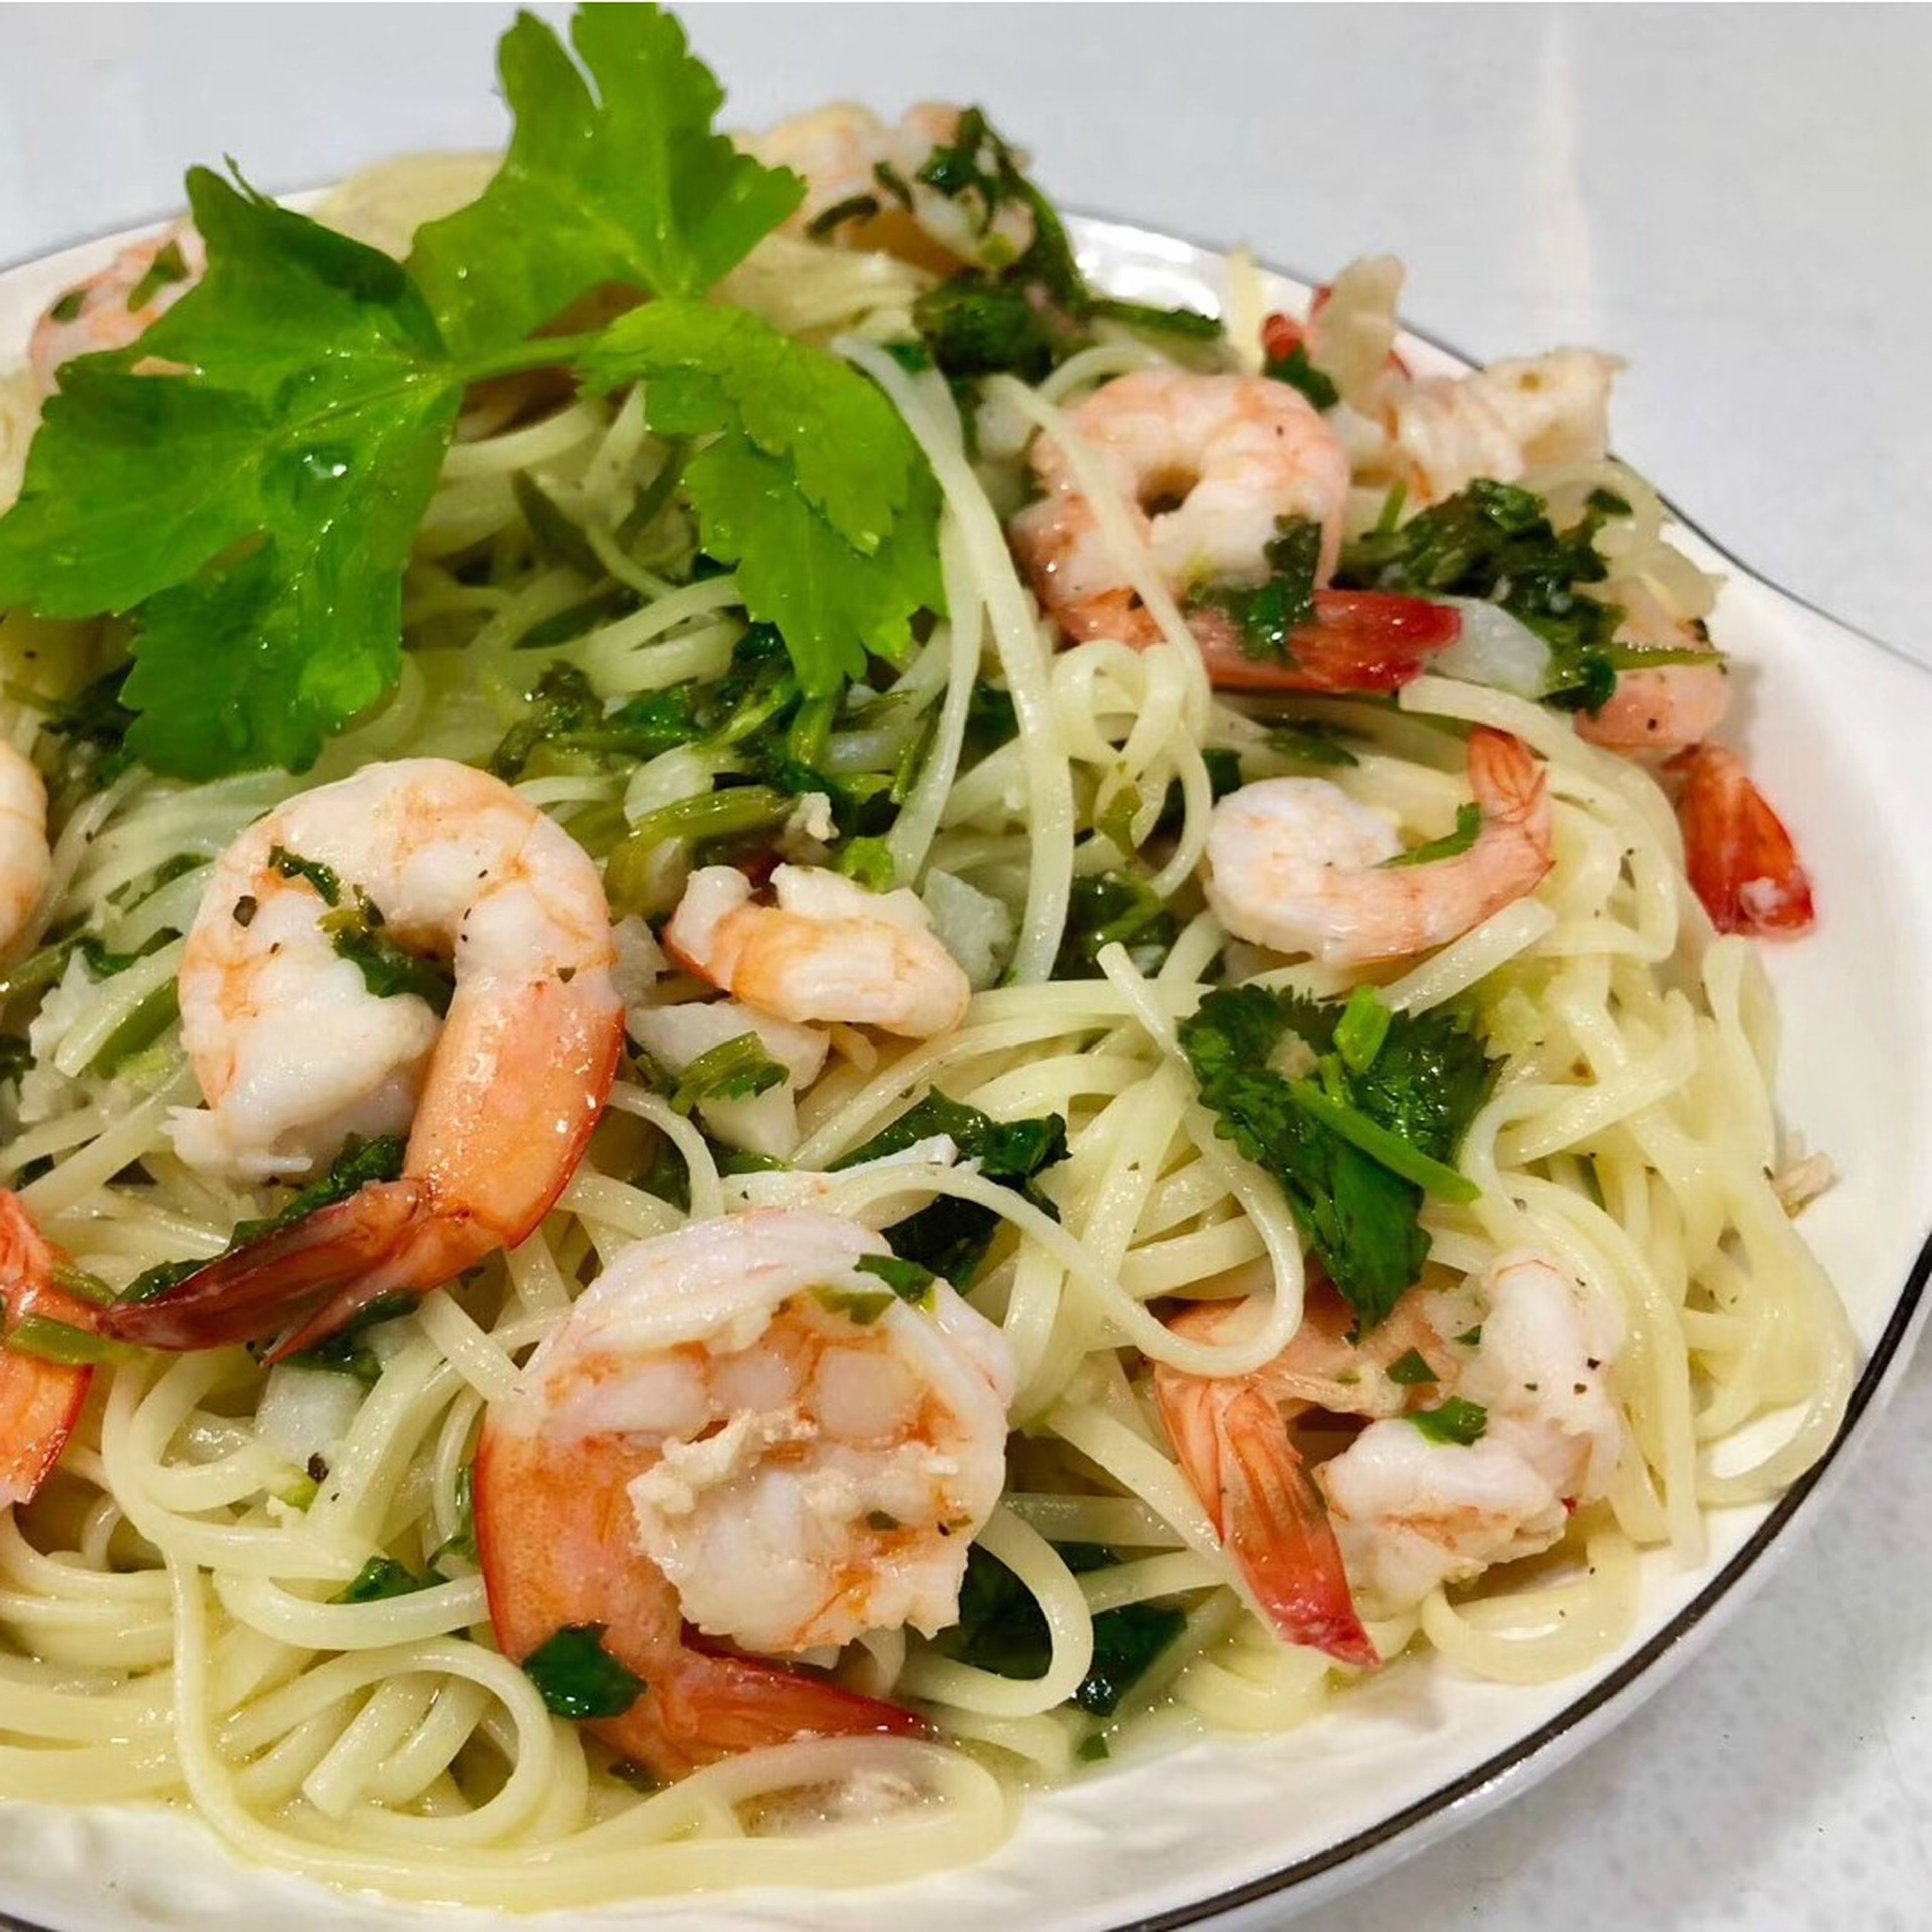 Angel hair pasta with shrimp in white wine sauce